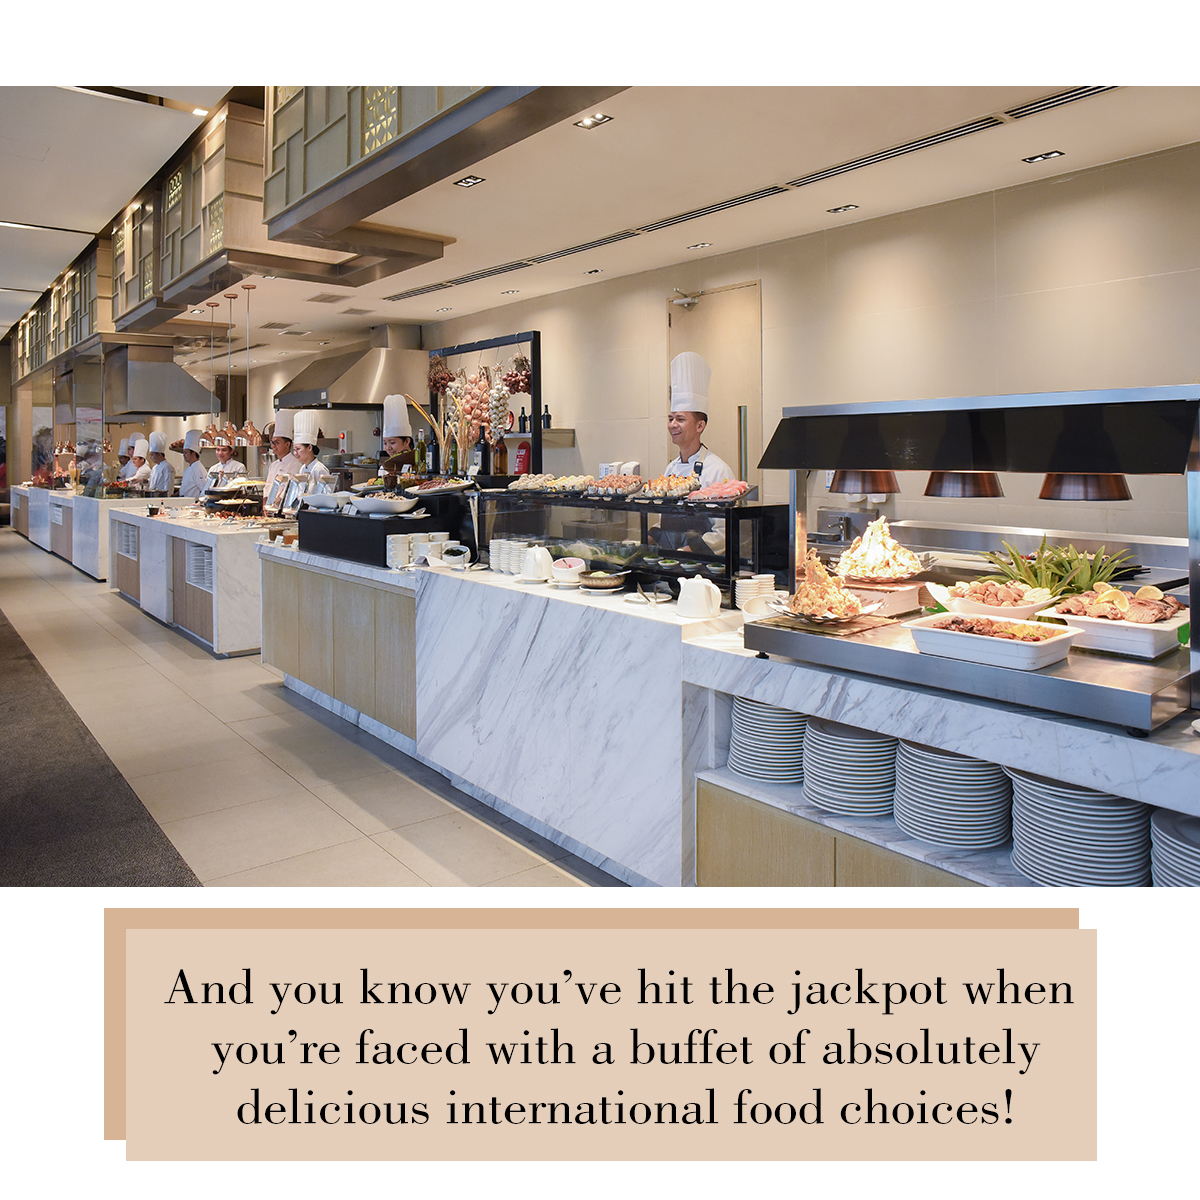 And you know you've hit jackpot when you're faced with a buffet of absolutely delicious international food choices!